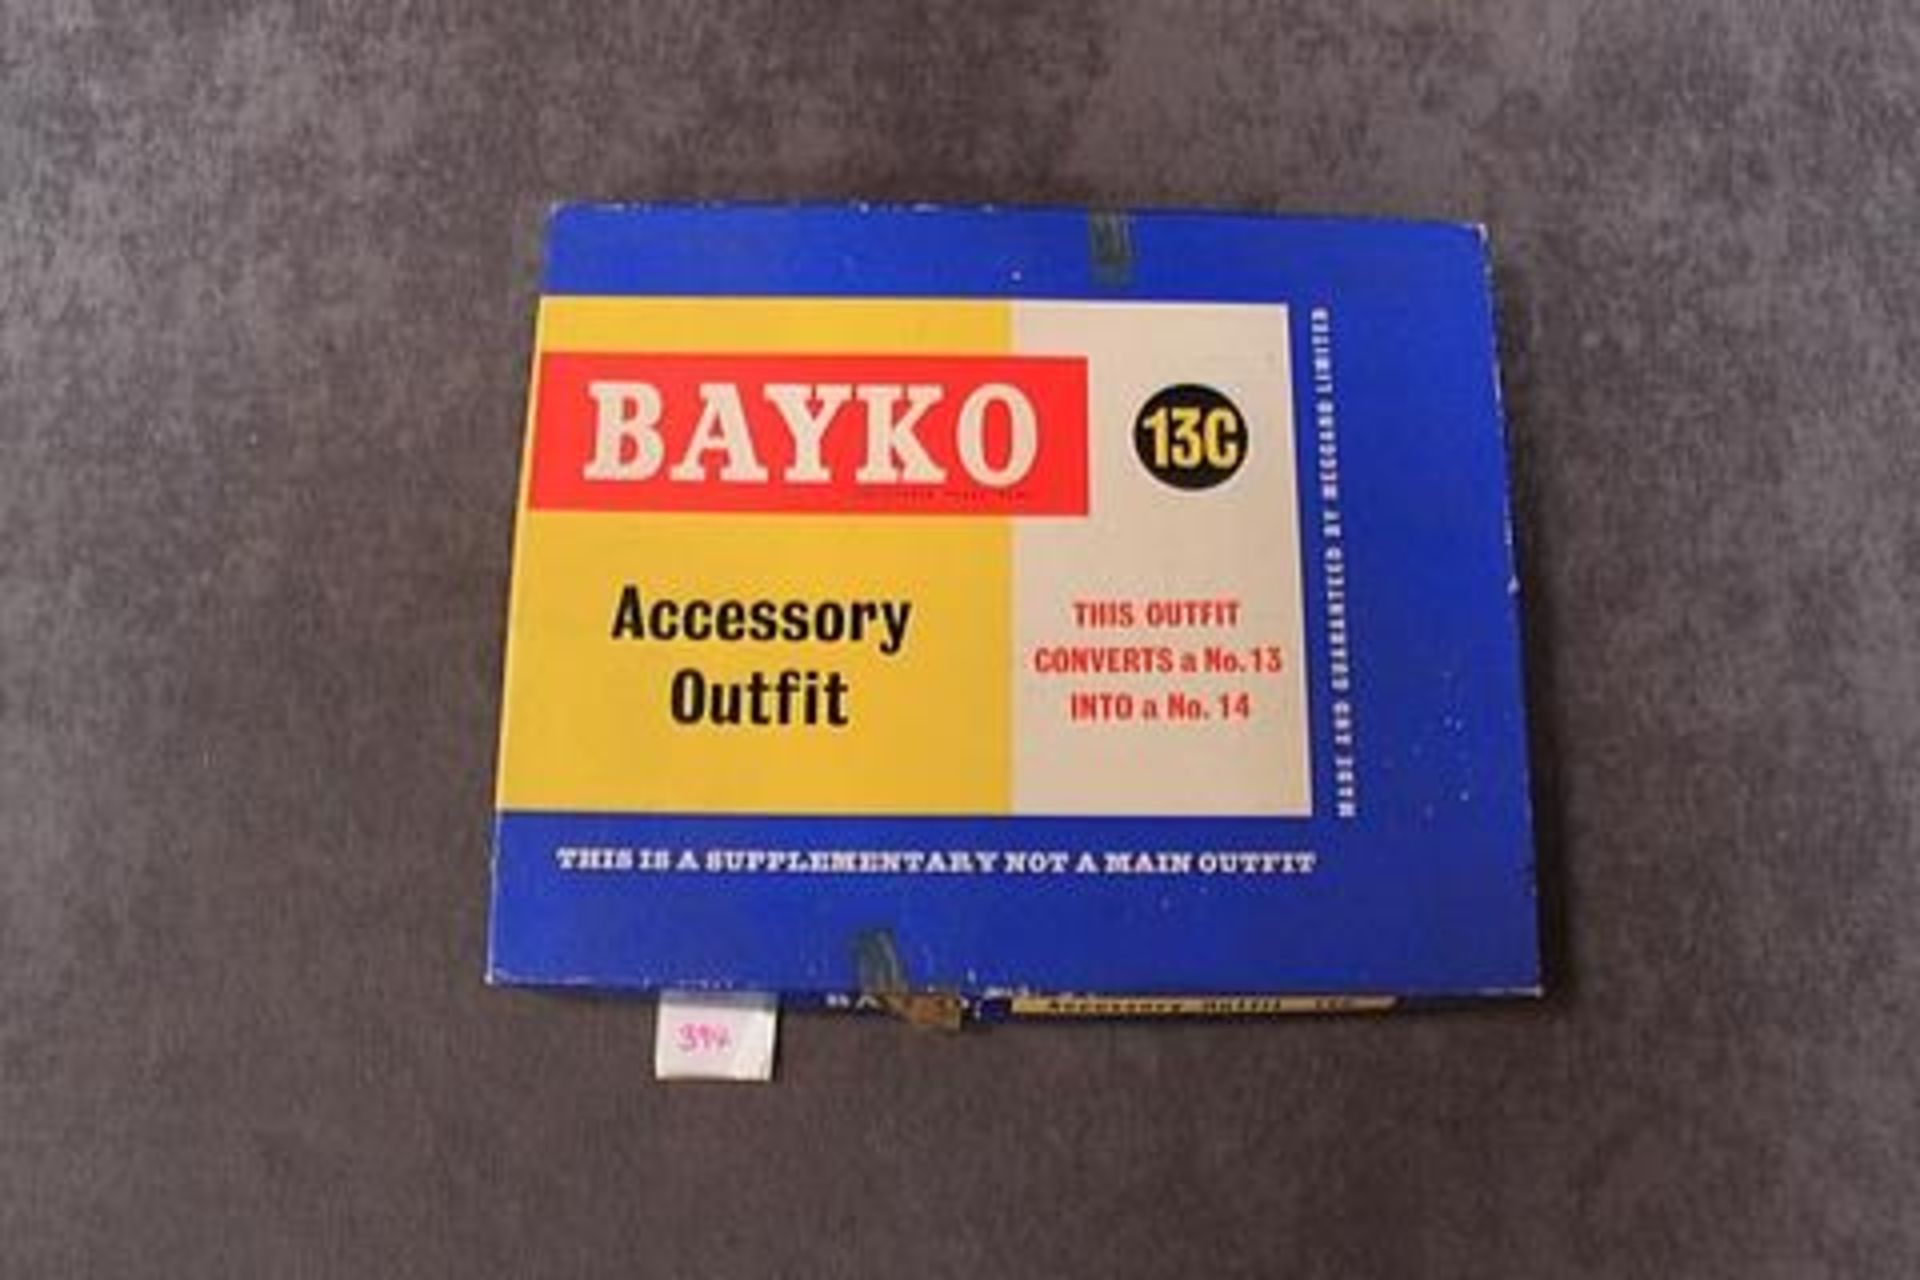 Meccano Bayko Accessory Outfit 13C With Box - Image 2 of 2